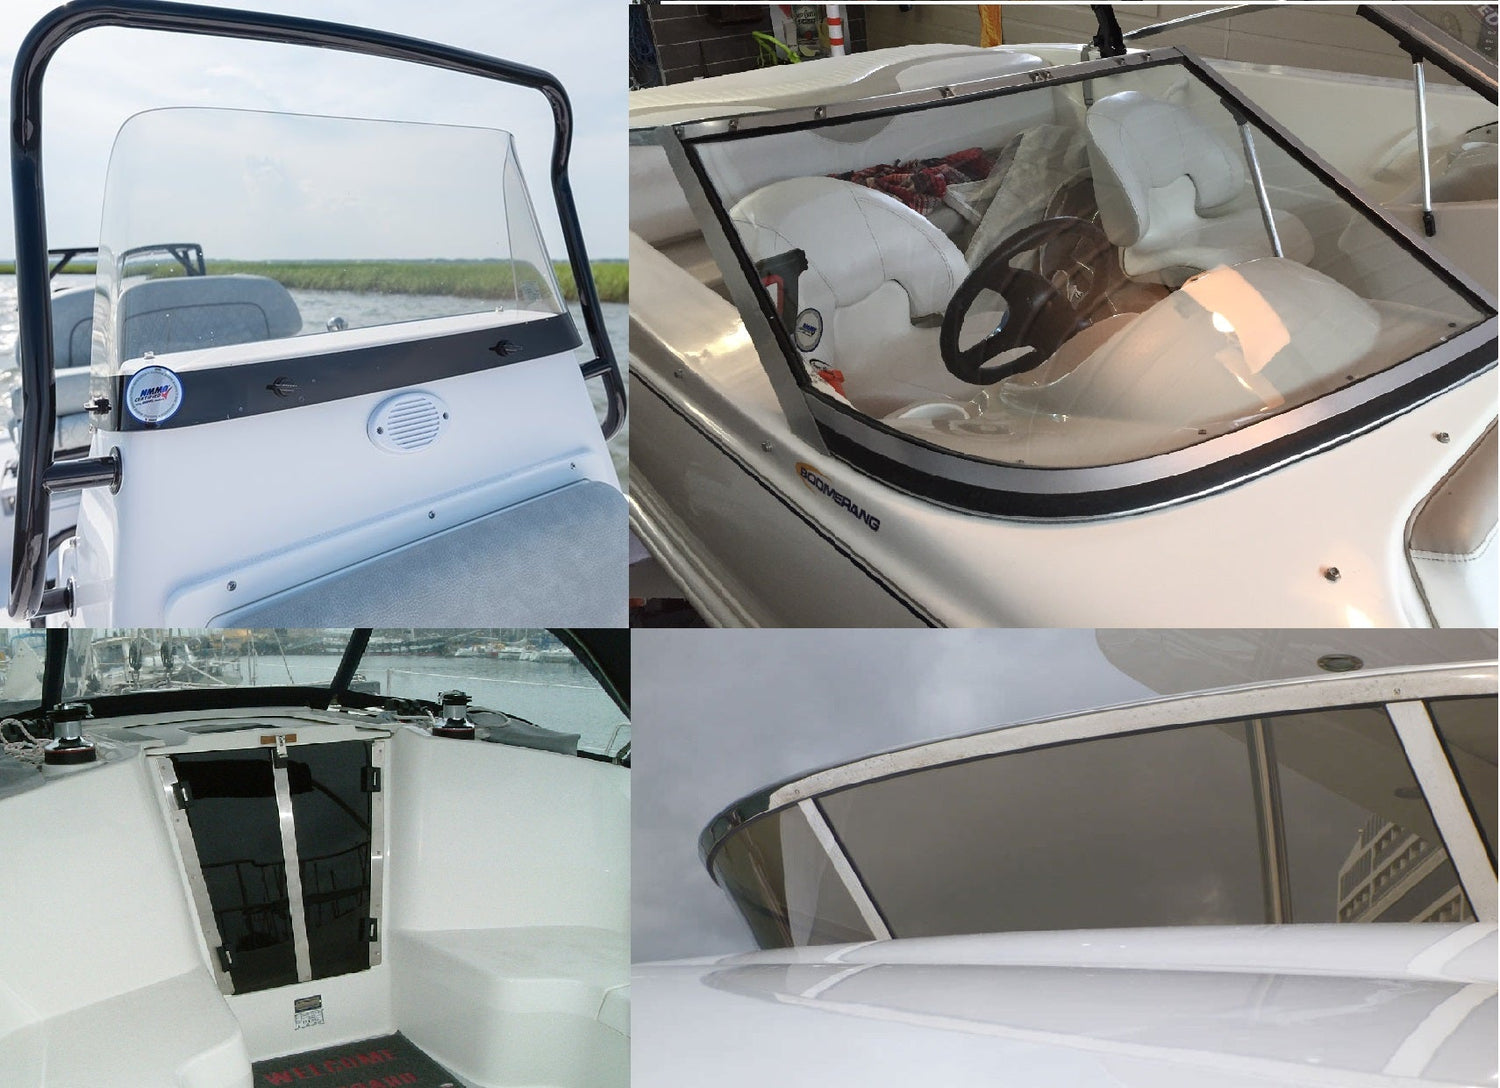 Universal Curved Glass Boat Windshield Repair